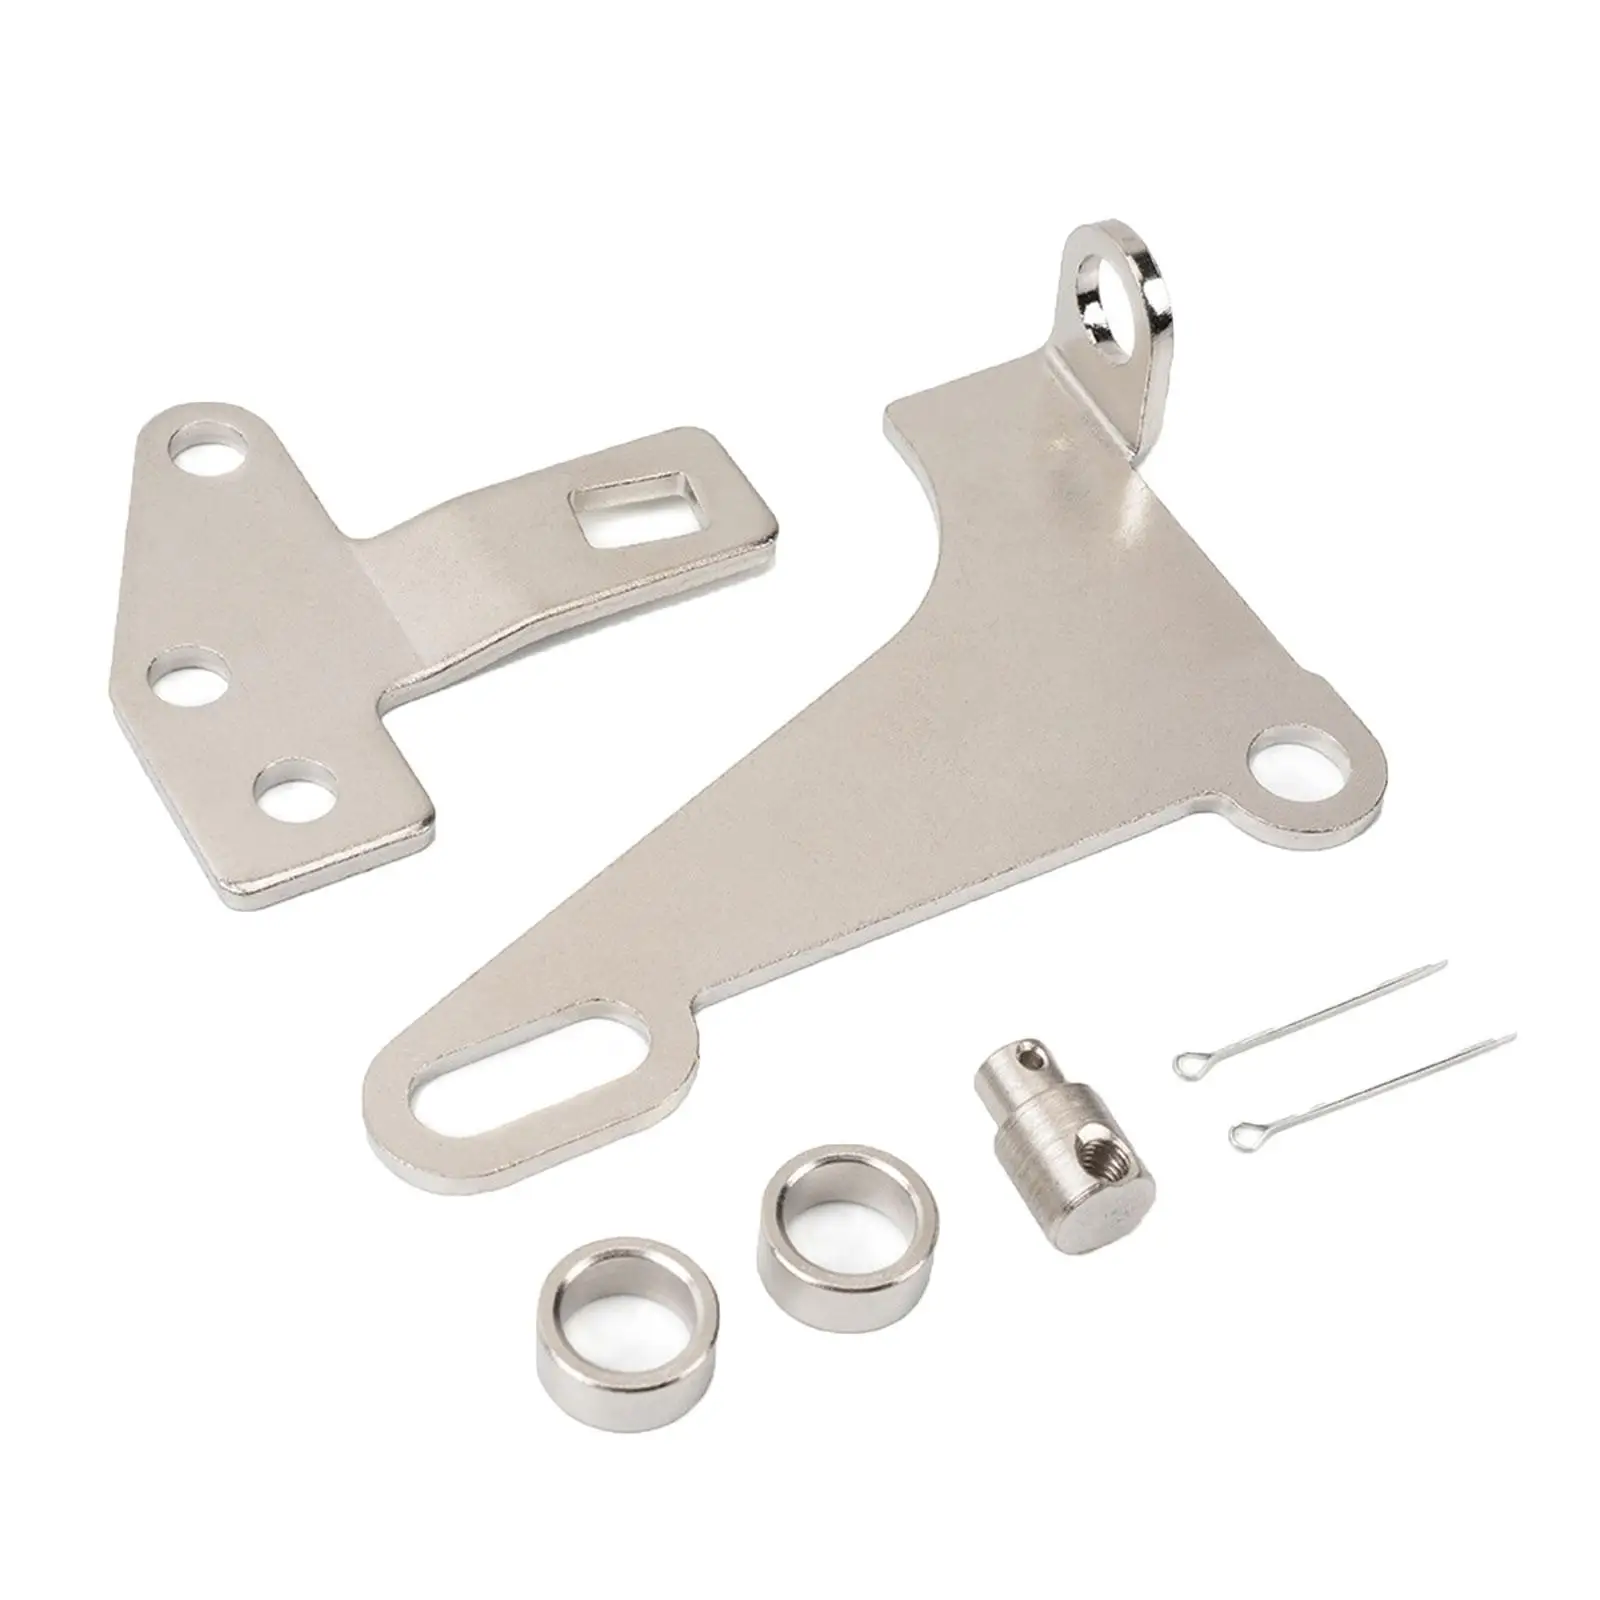 Bracket and Lever Kit Repair Durable Assembly Car Accessories for GM